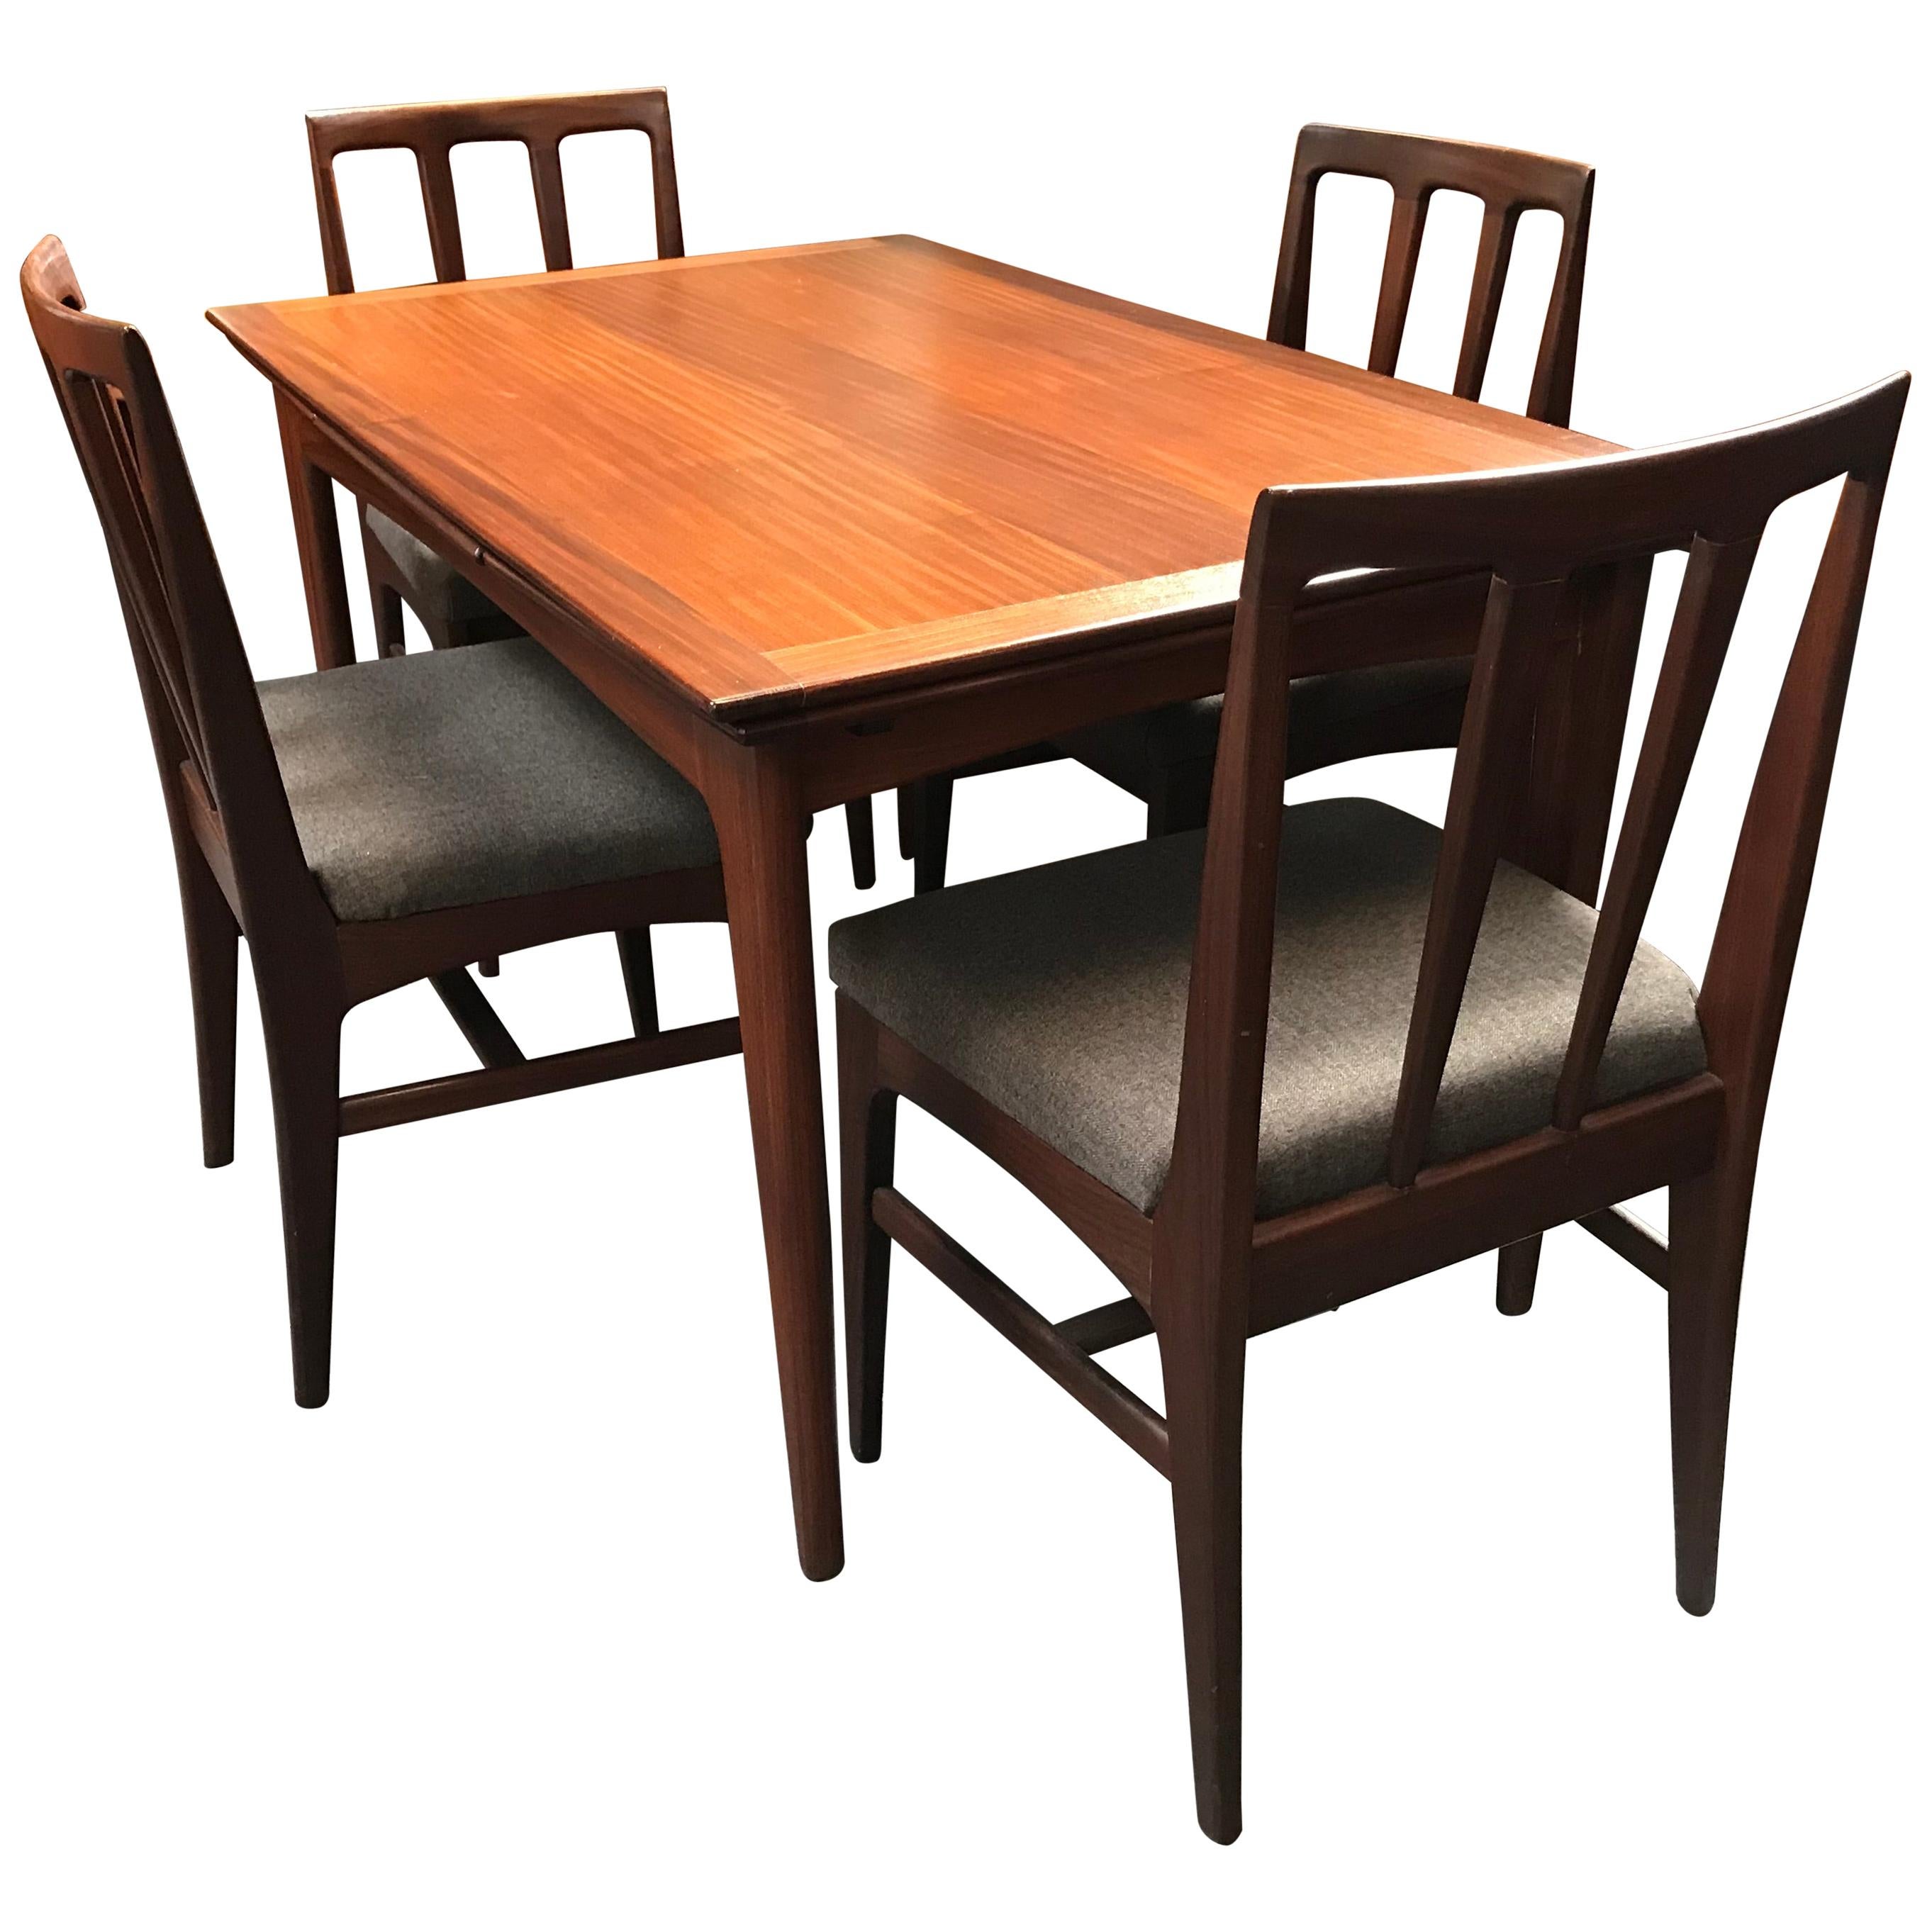 Extending Midcentury Afrormosia Dining Table with 4 Chairs by Younger of Glasgow For Sale